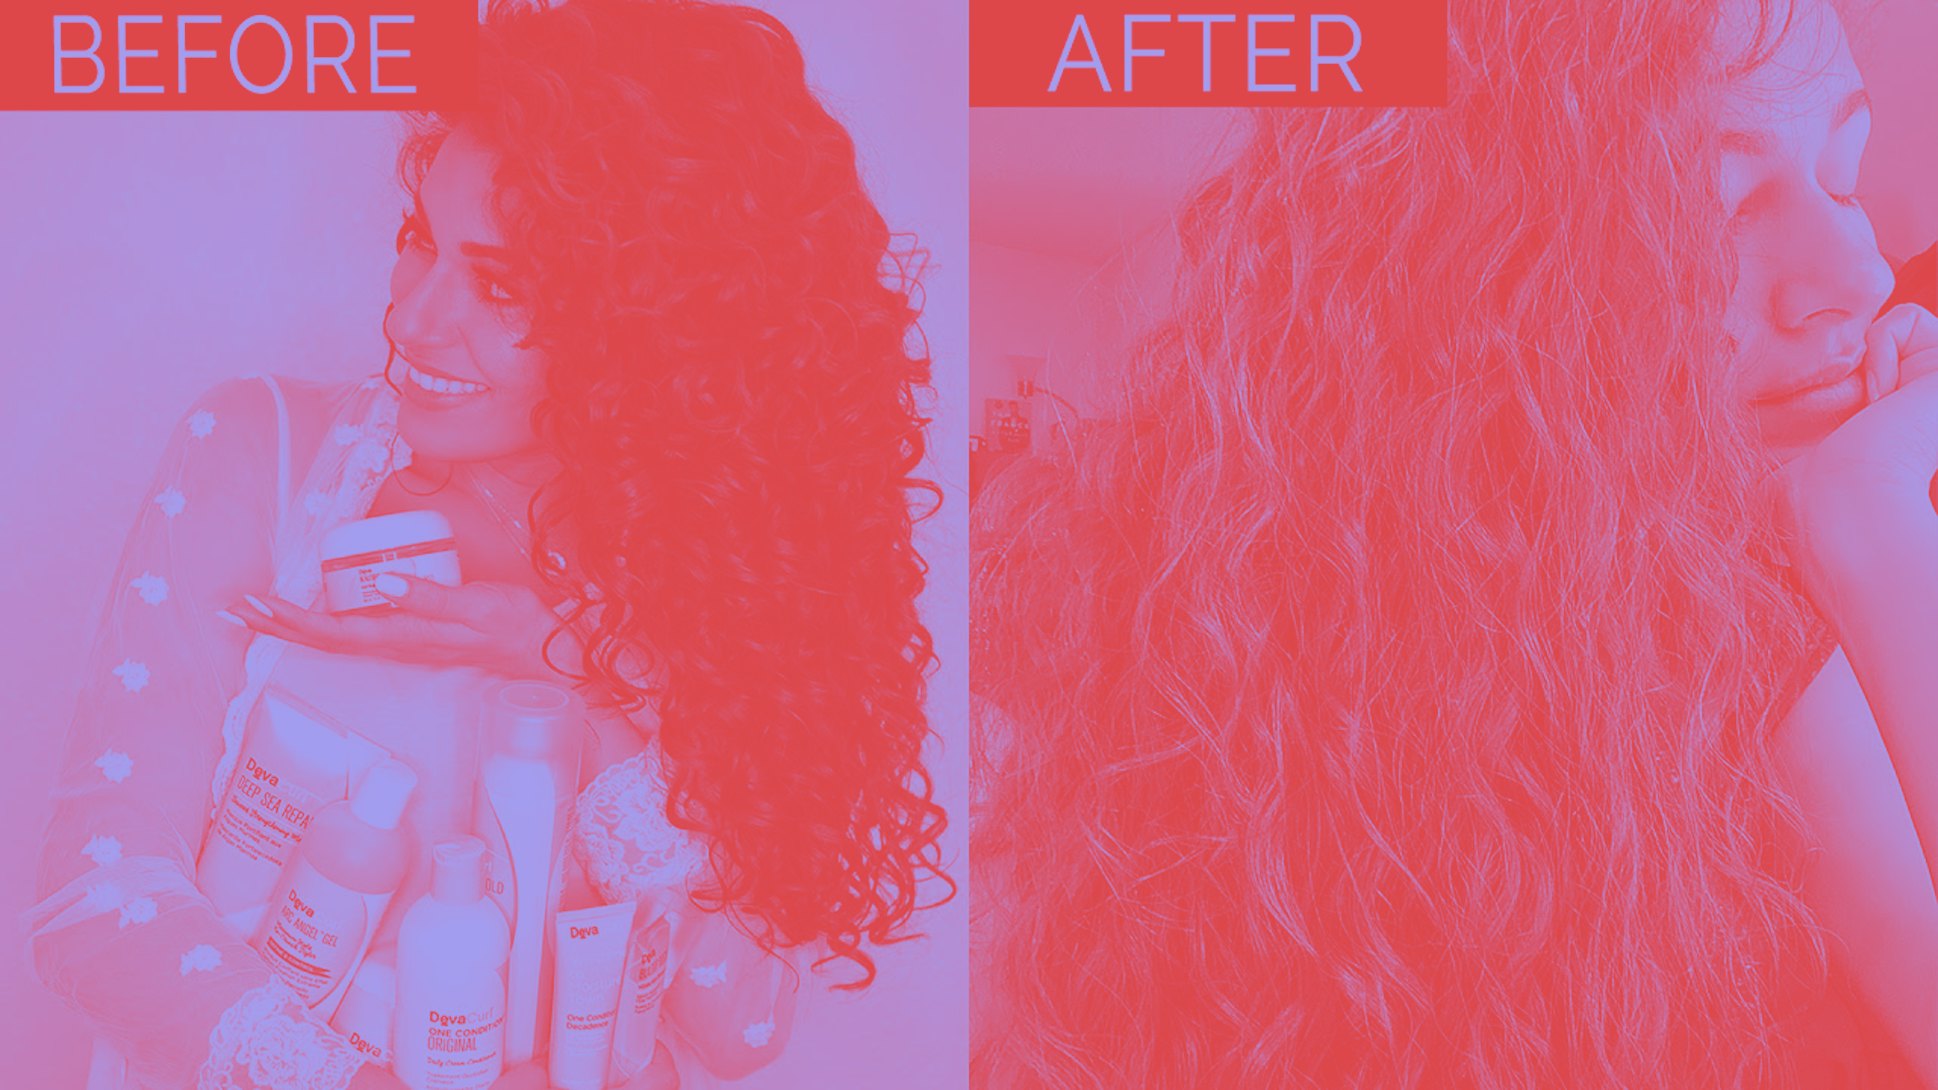 Scorned by a viral beauty product, ex-DevaCurl users band together online